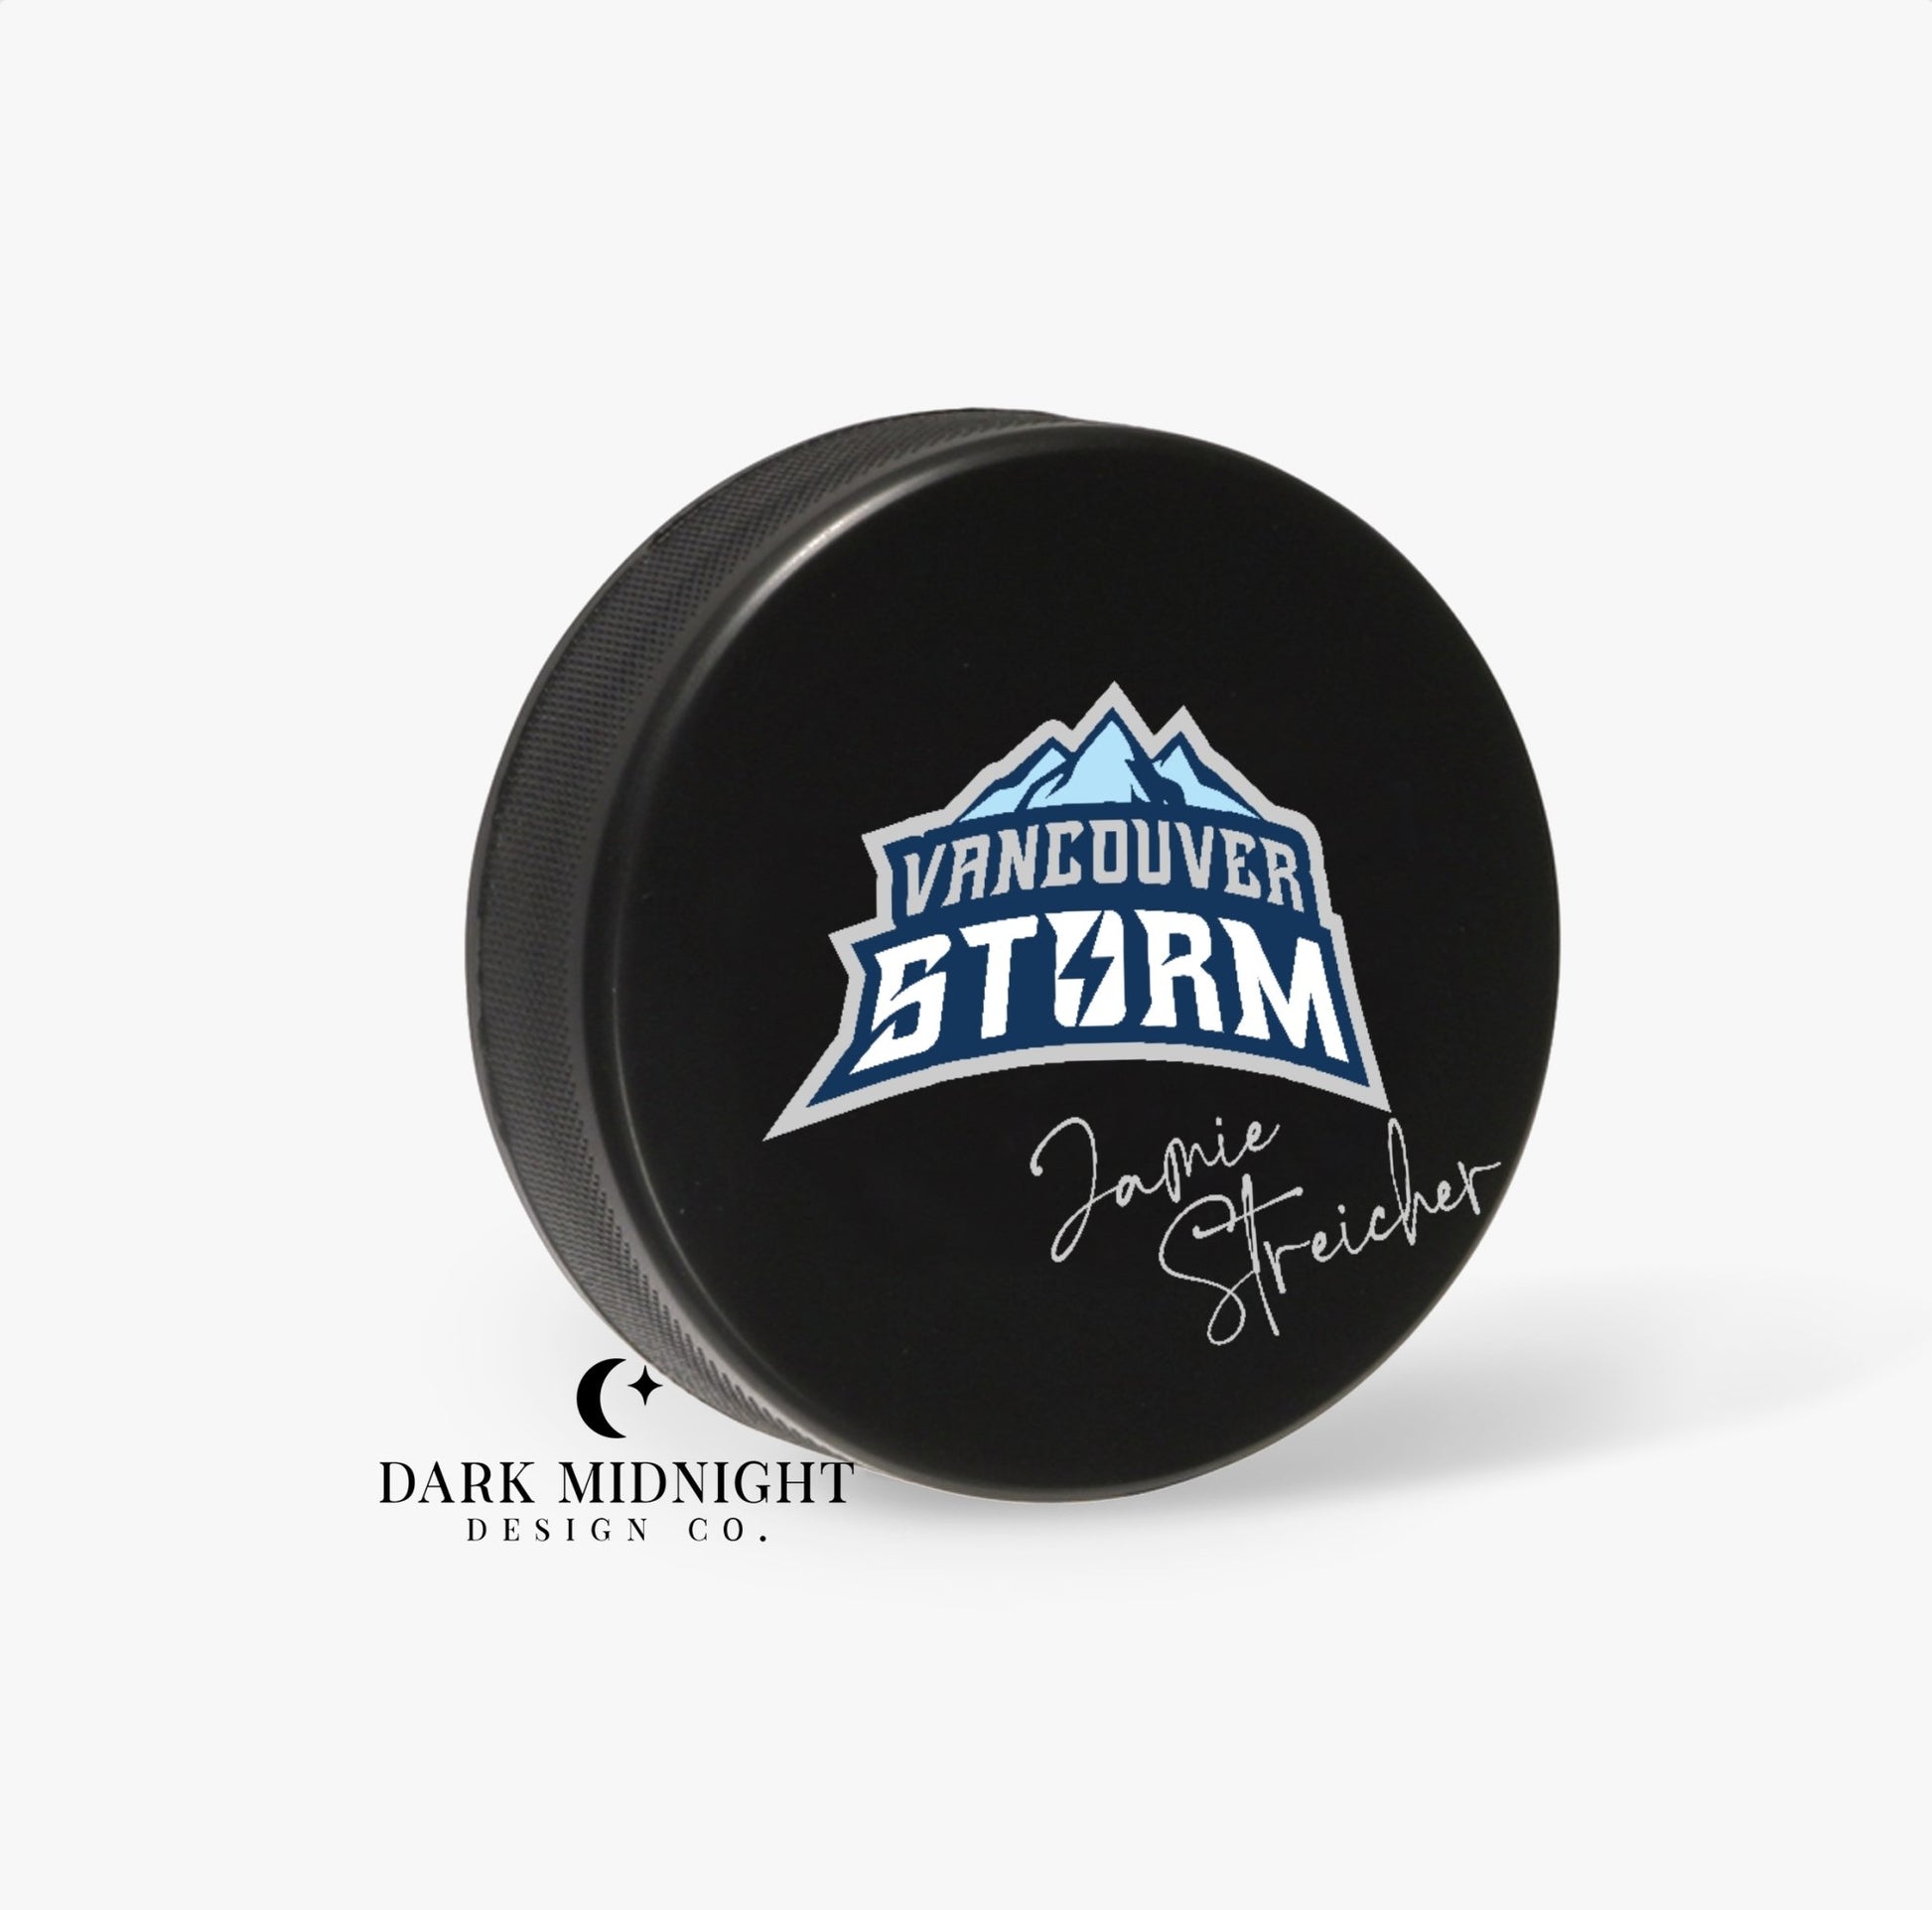 Pre-Order: Vancouver Storm Jamie Streicher Signed Hockey Puck - Officially Licensed Vancouver Storm Series - Dark Midnight Design Co